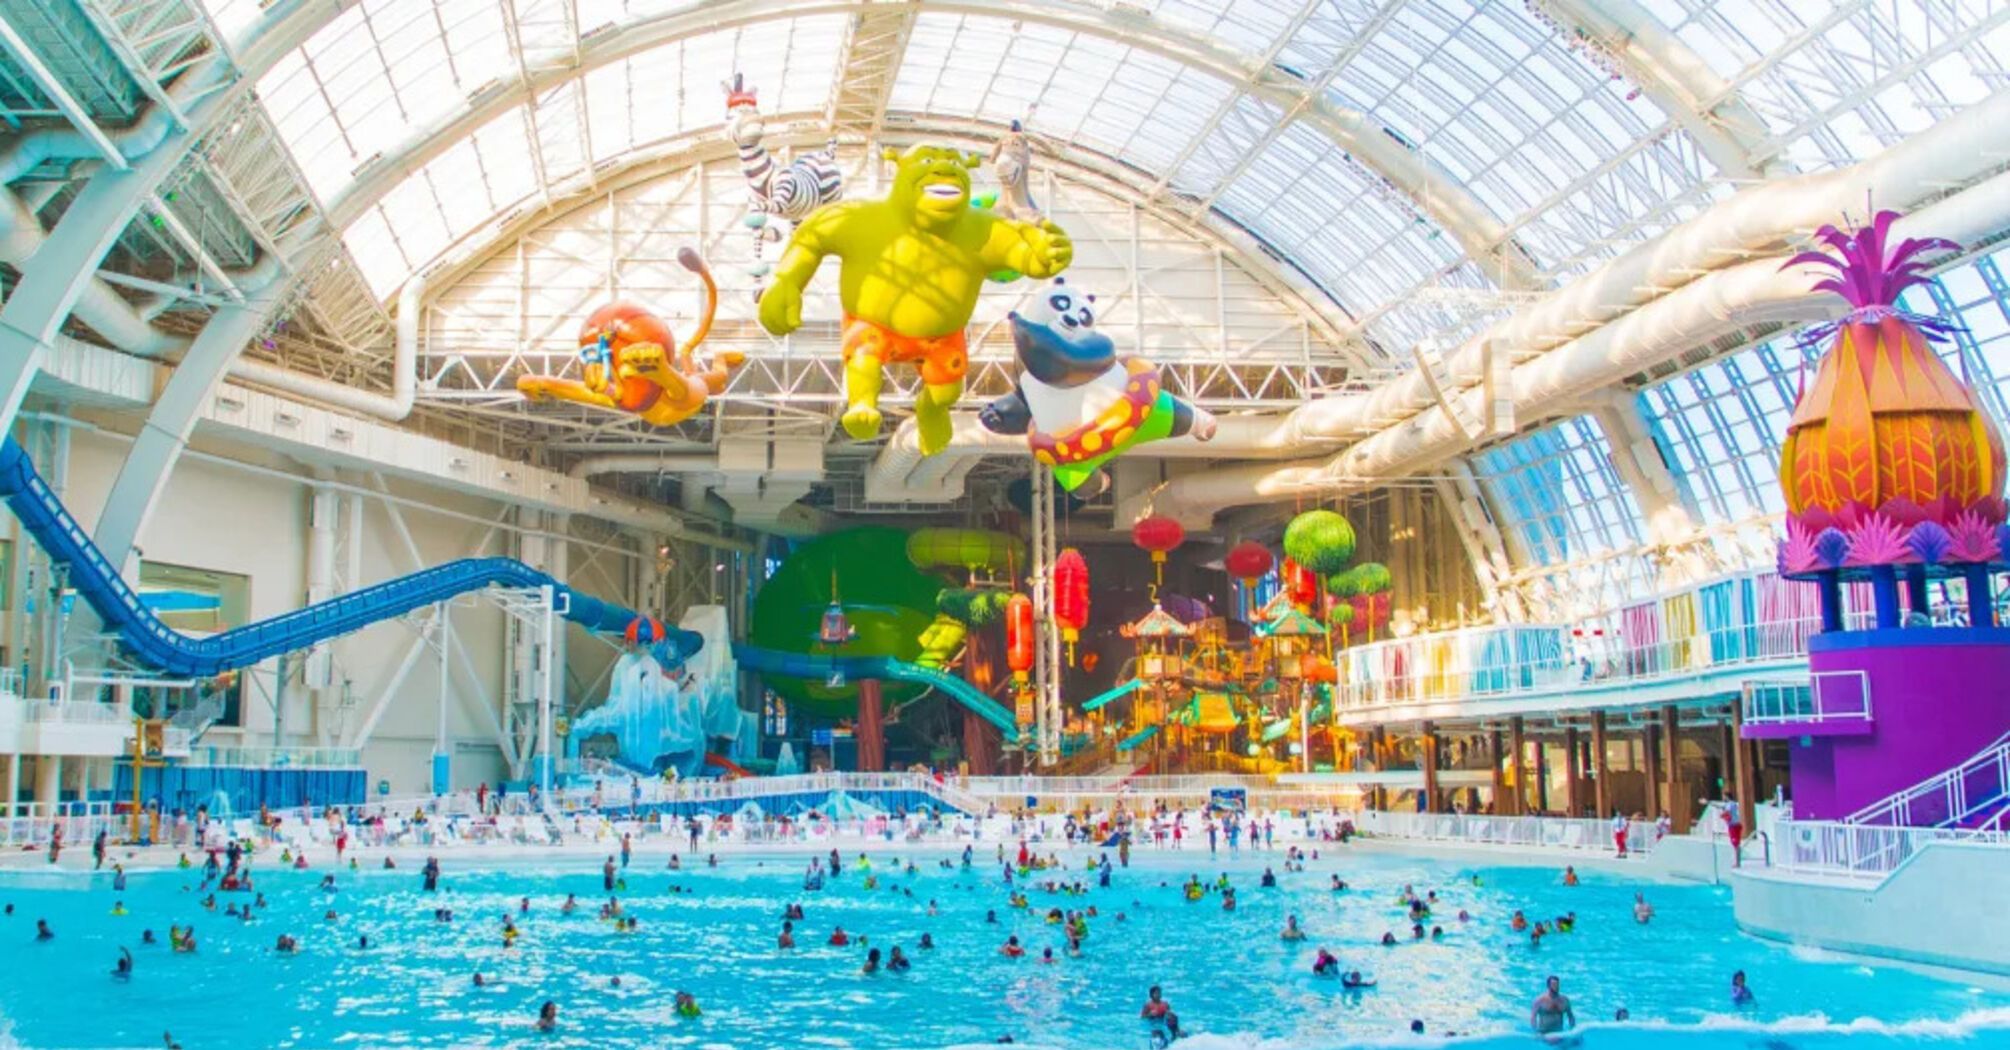 The best indoor water parks in the US for year-round summer vacations. Places to ride big water slides and waves